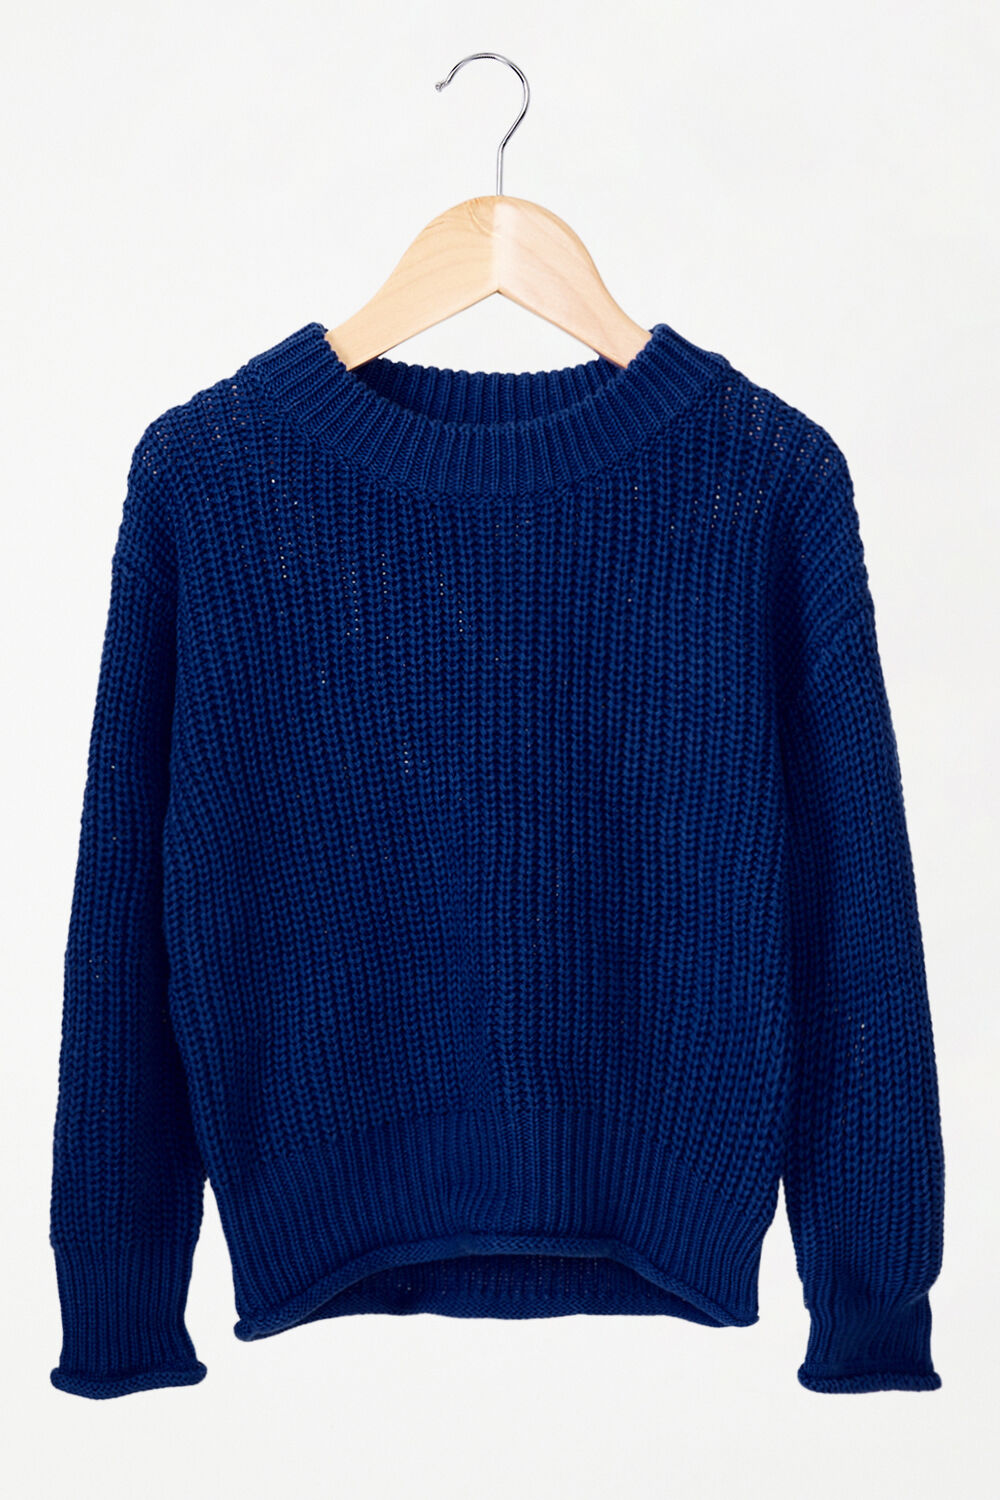 GIRLS HOLLY KNIT JUMPER  in colour BRIGHT COBALT